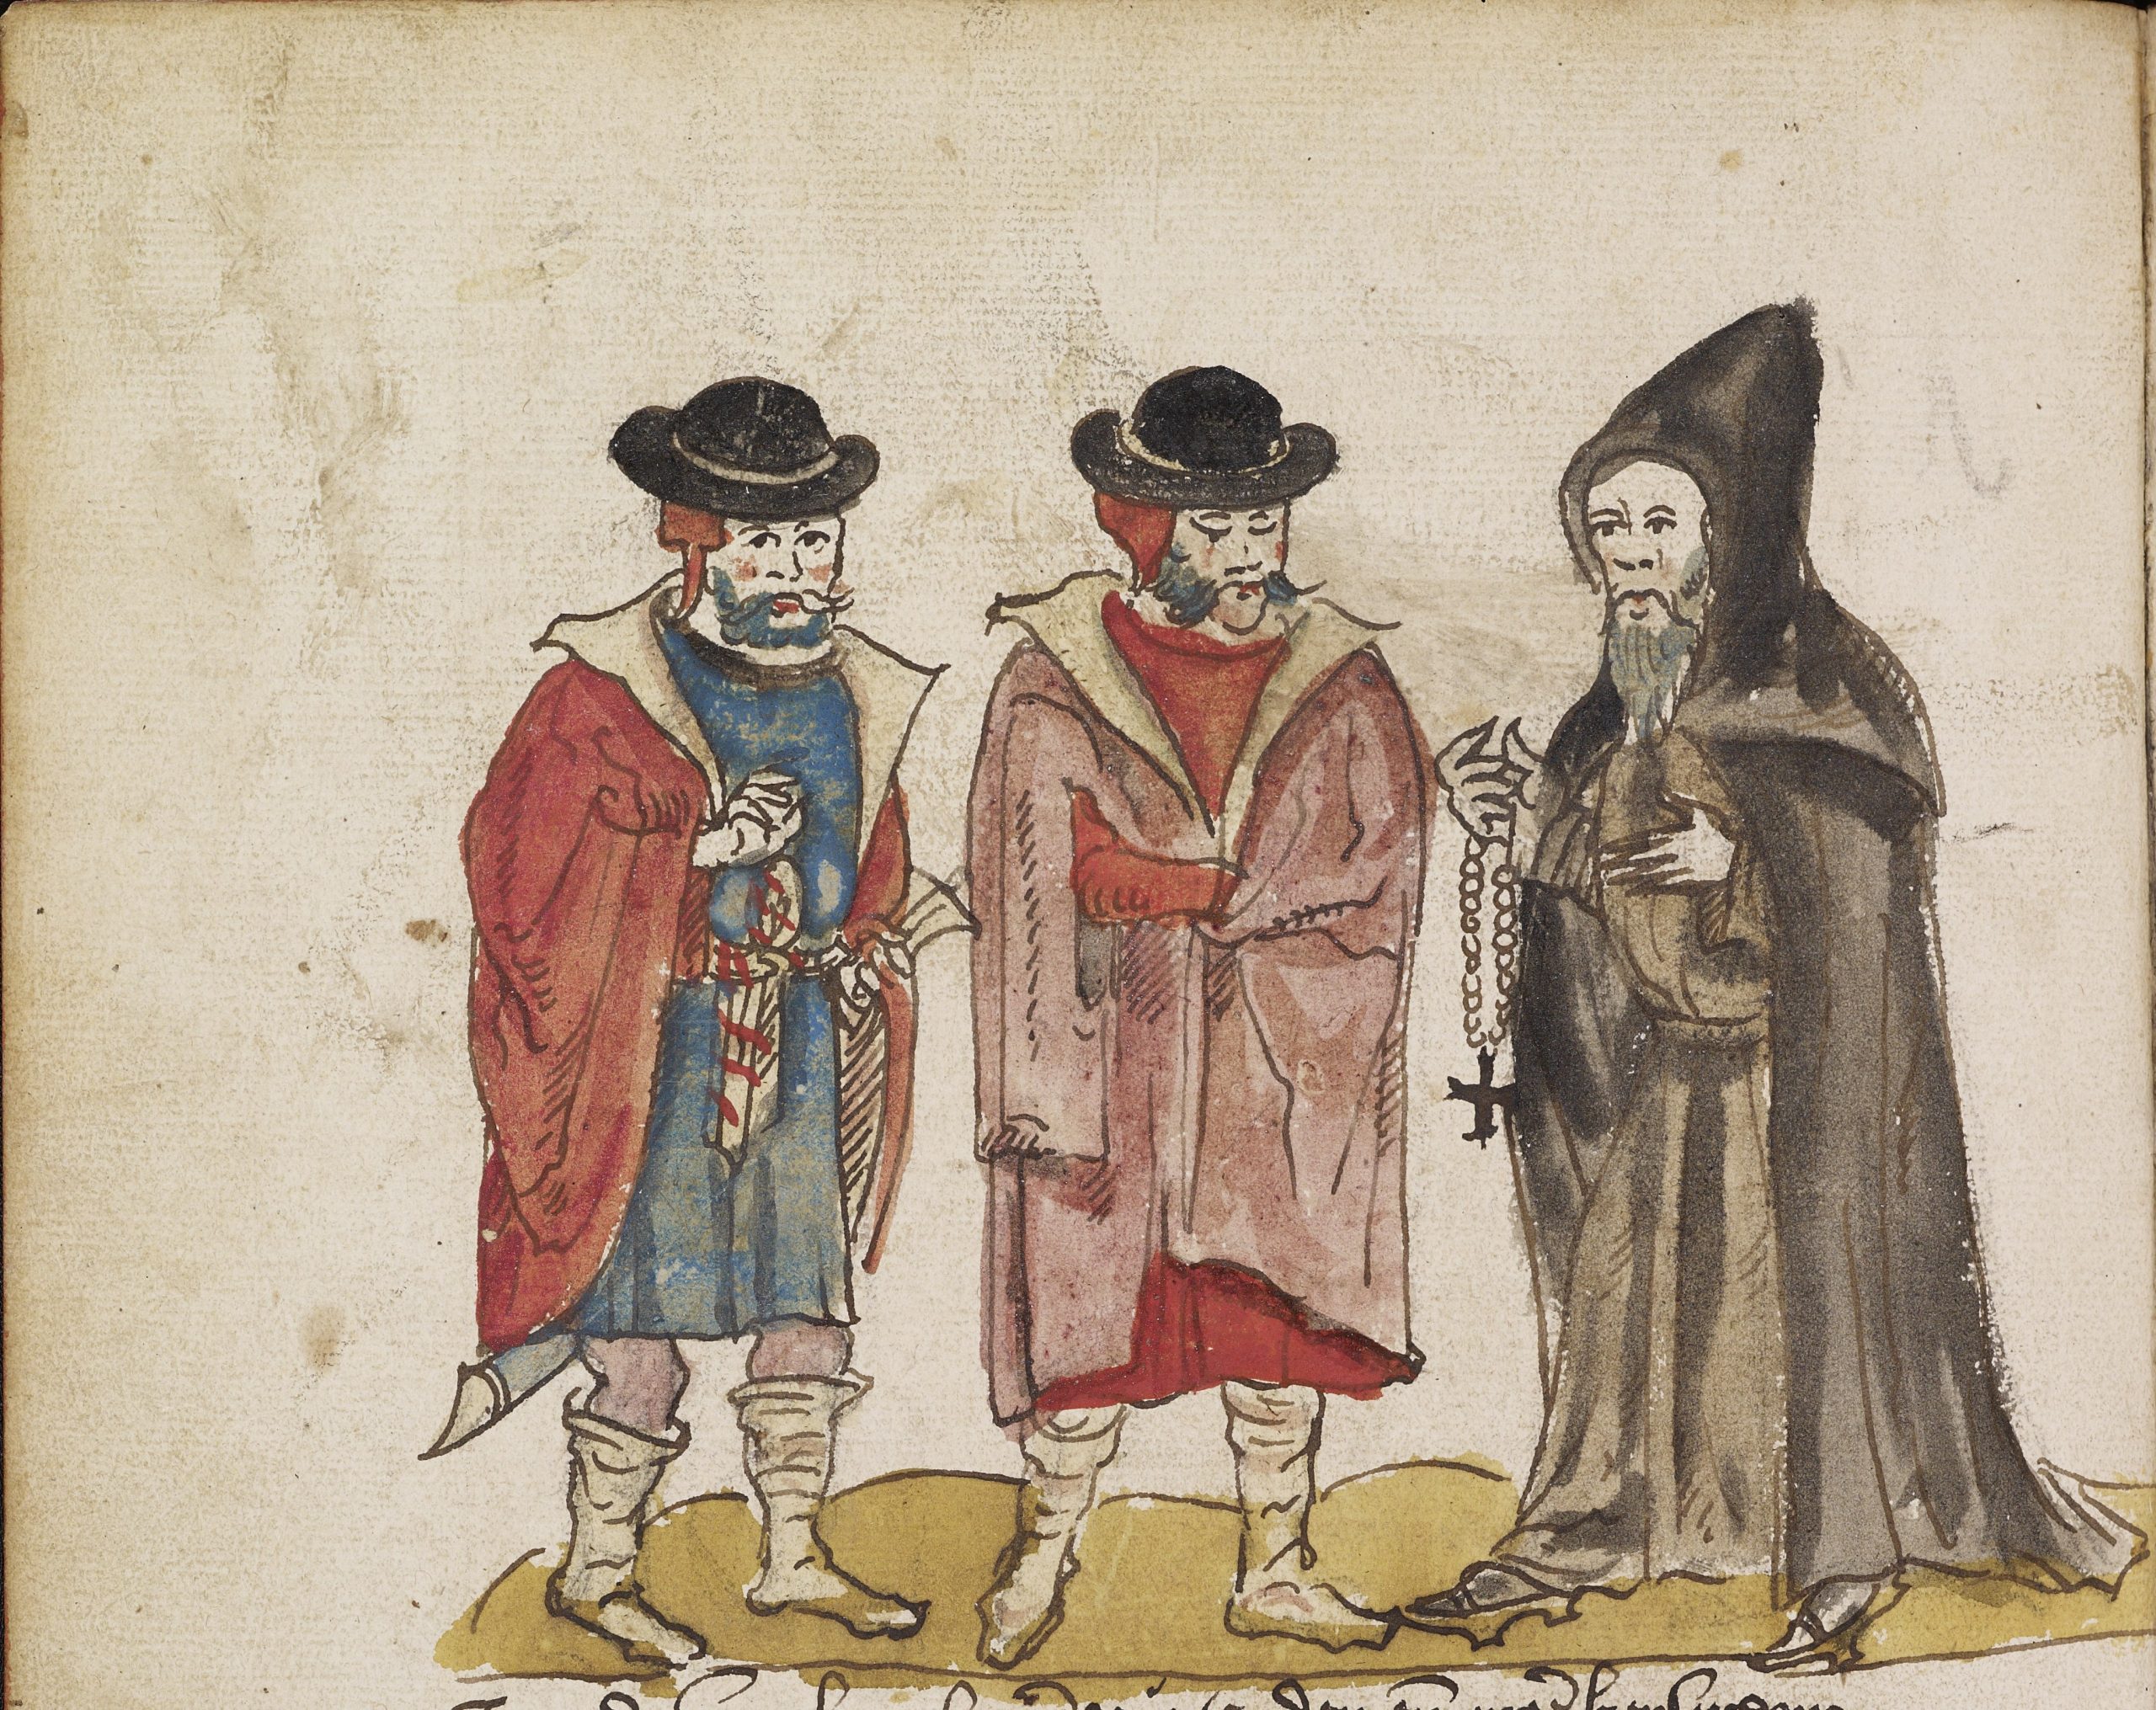 Sixteenth-century pen and wash depiction of three figures representing Greek Christians